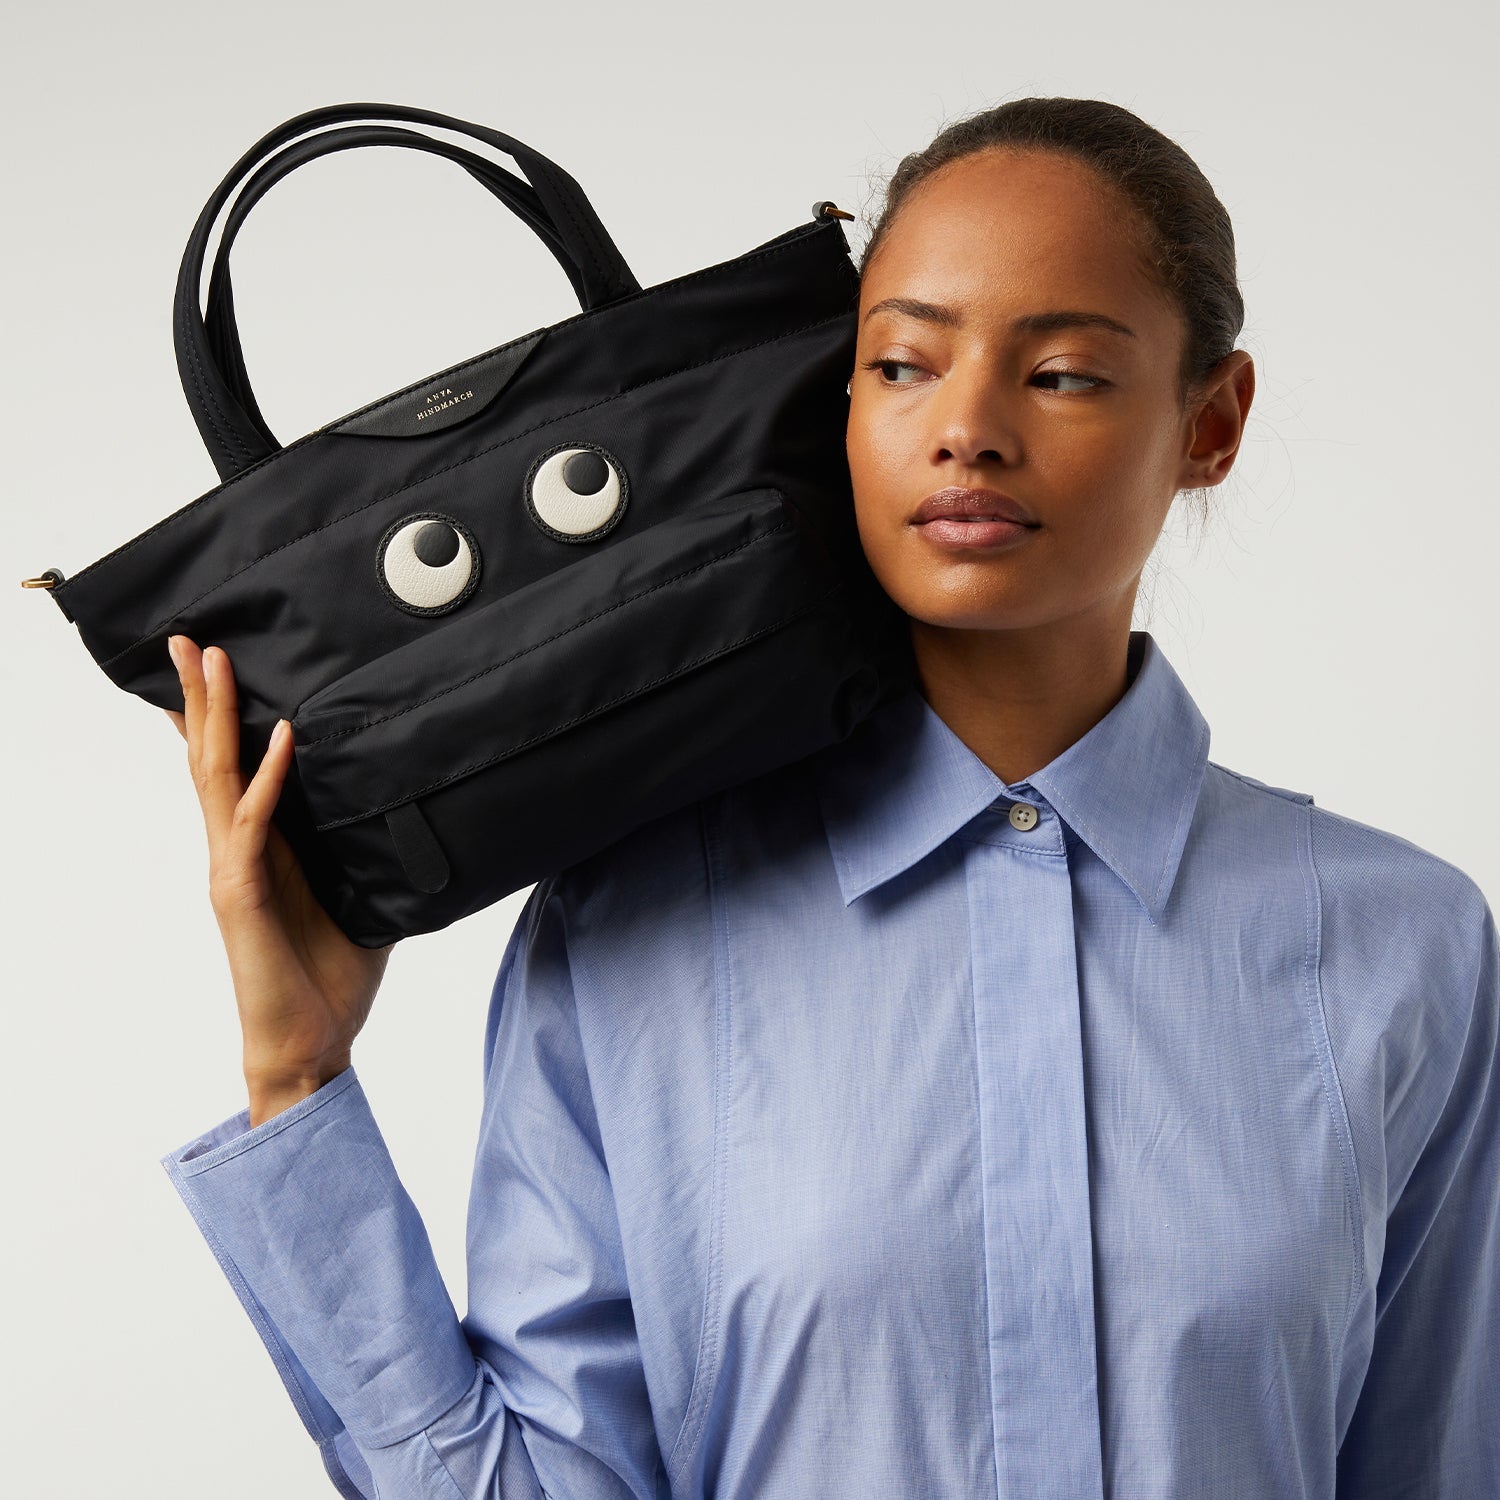 Anya Hindmarch x Uniqlo collection: How to buy and what to shop